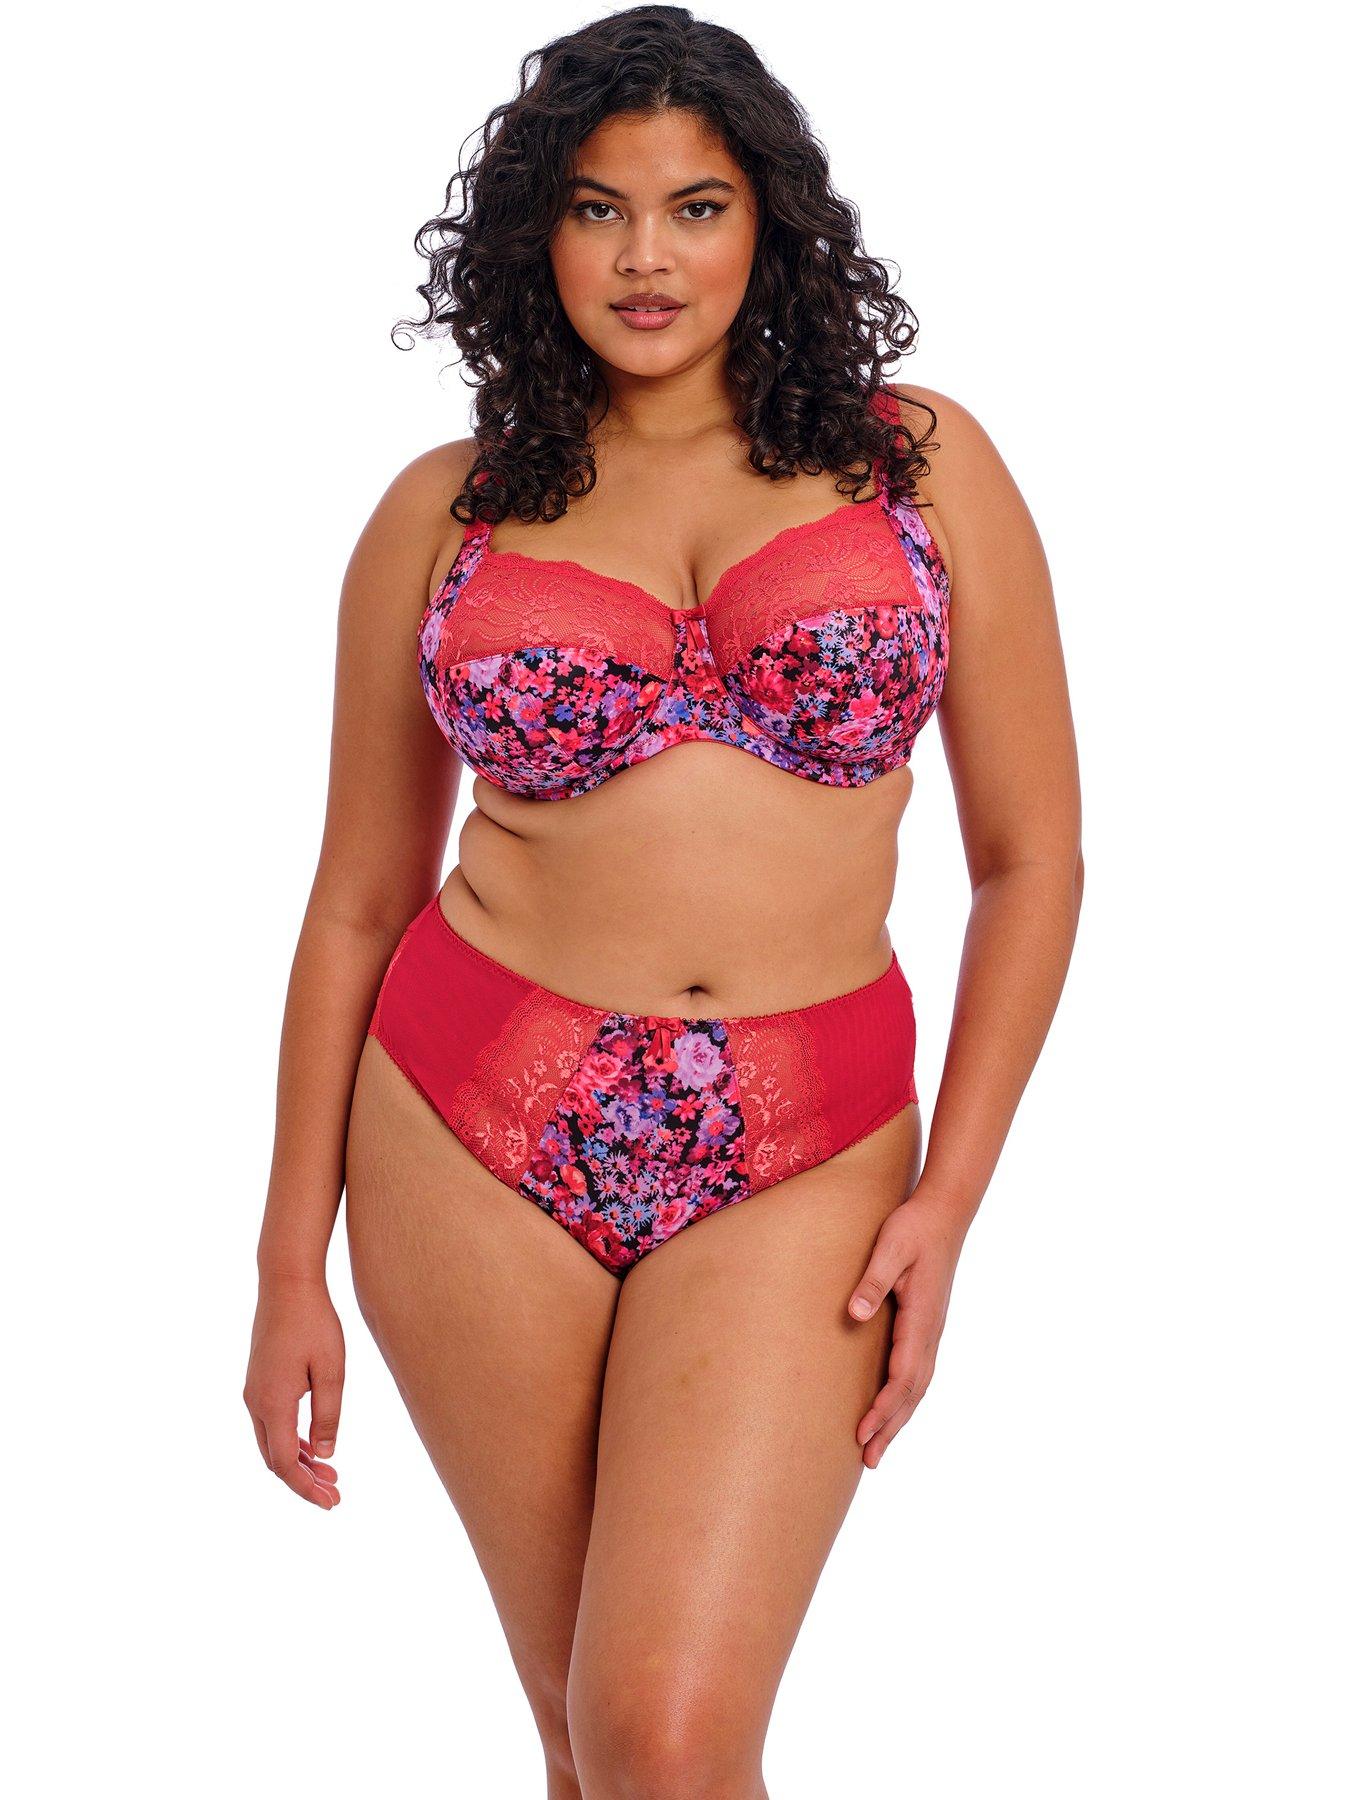 Icollection Plus Phoeny Galloon Lace and Floral Satin Lingerie